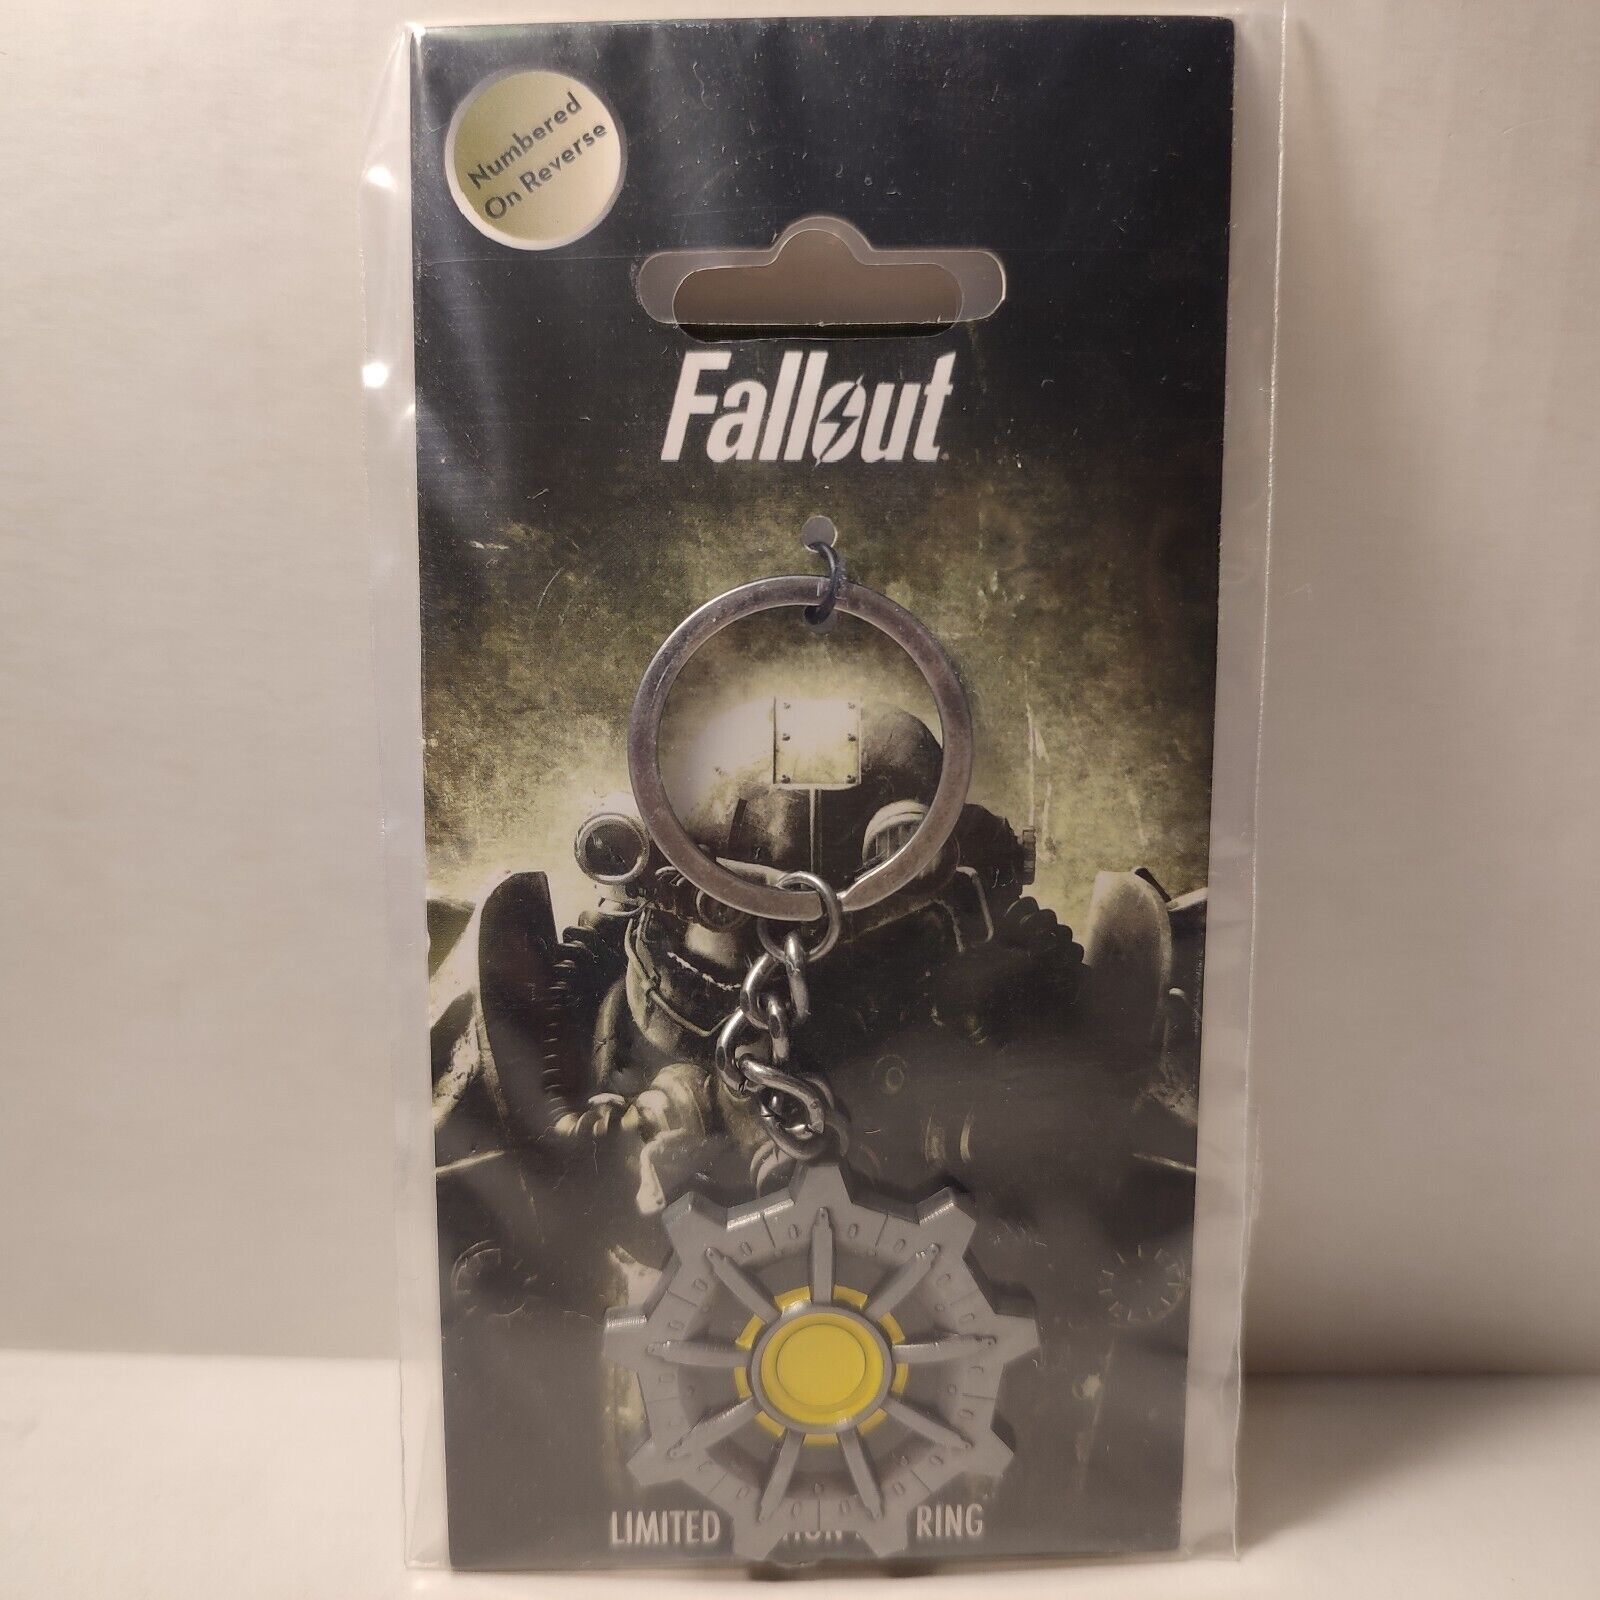 Fallout Vault Door Keychain Limited Edition Official Collectible Metal Keyring